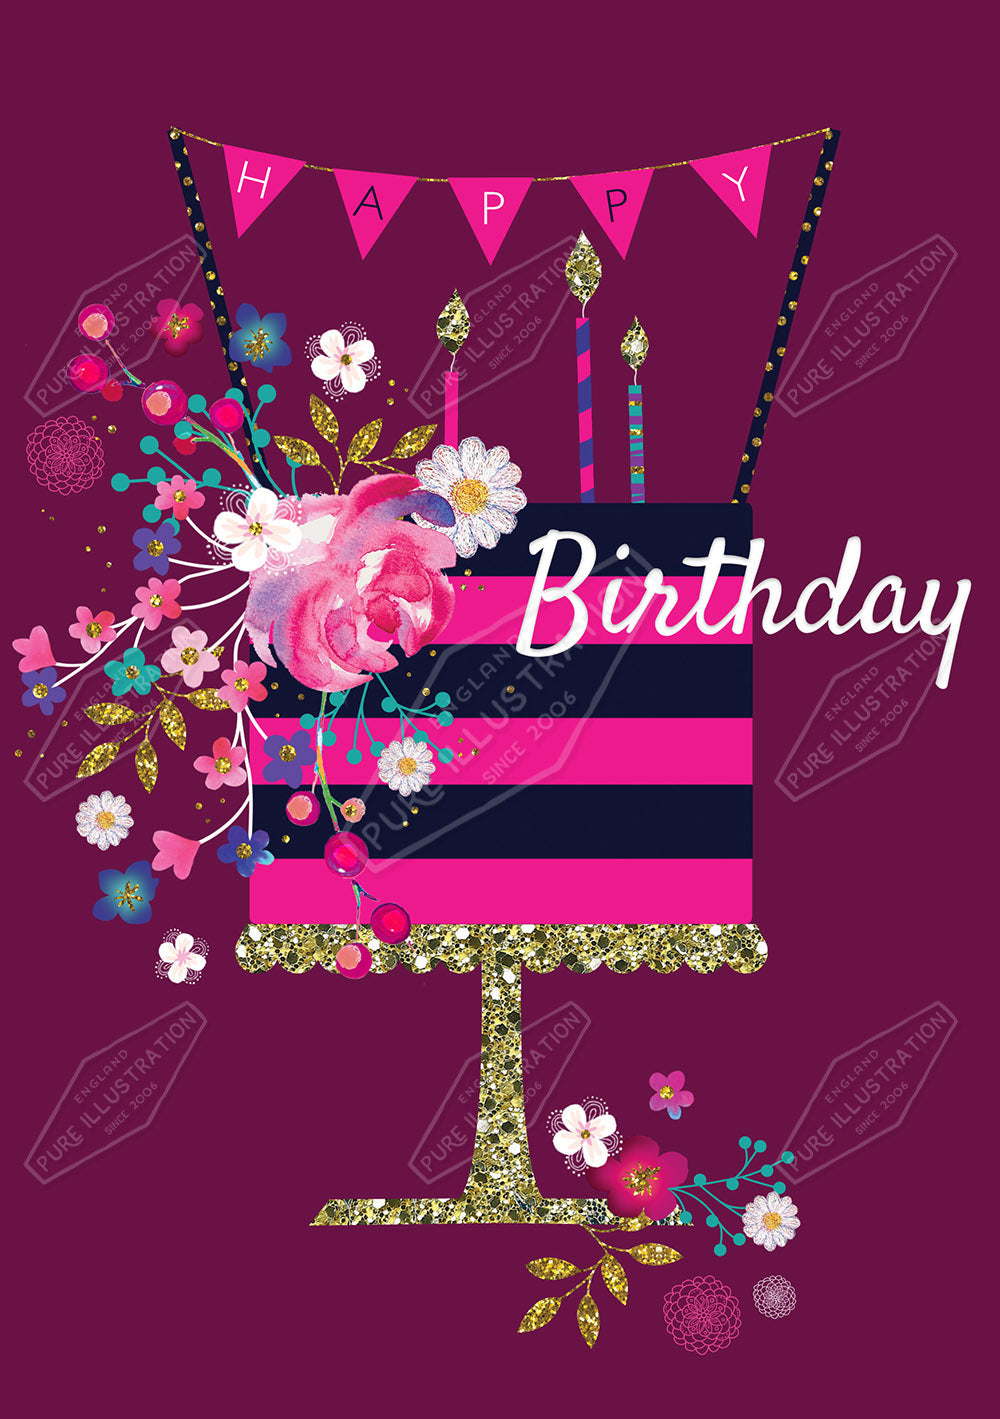 00033191KSP- Kerry Spurling is represented by Pure Art Licensing Agency - Birthday Greeting Card Design